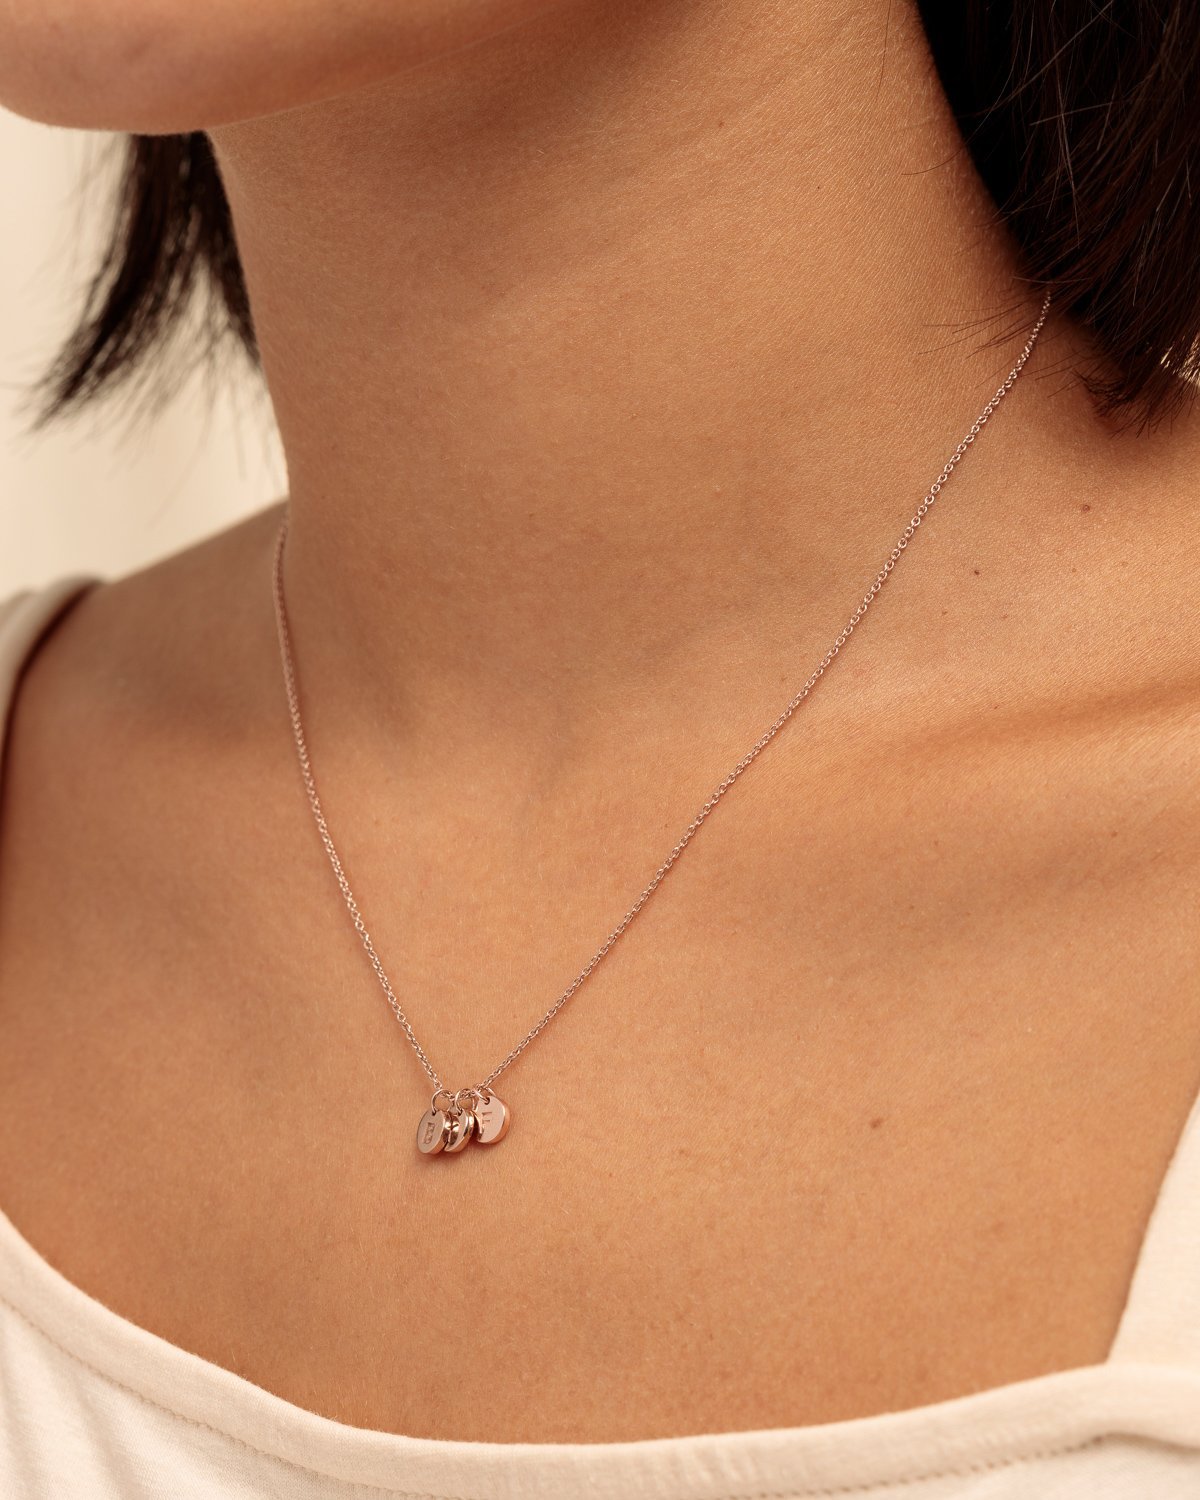 3 Layer Necklace with Charm | Bauble Sky